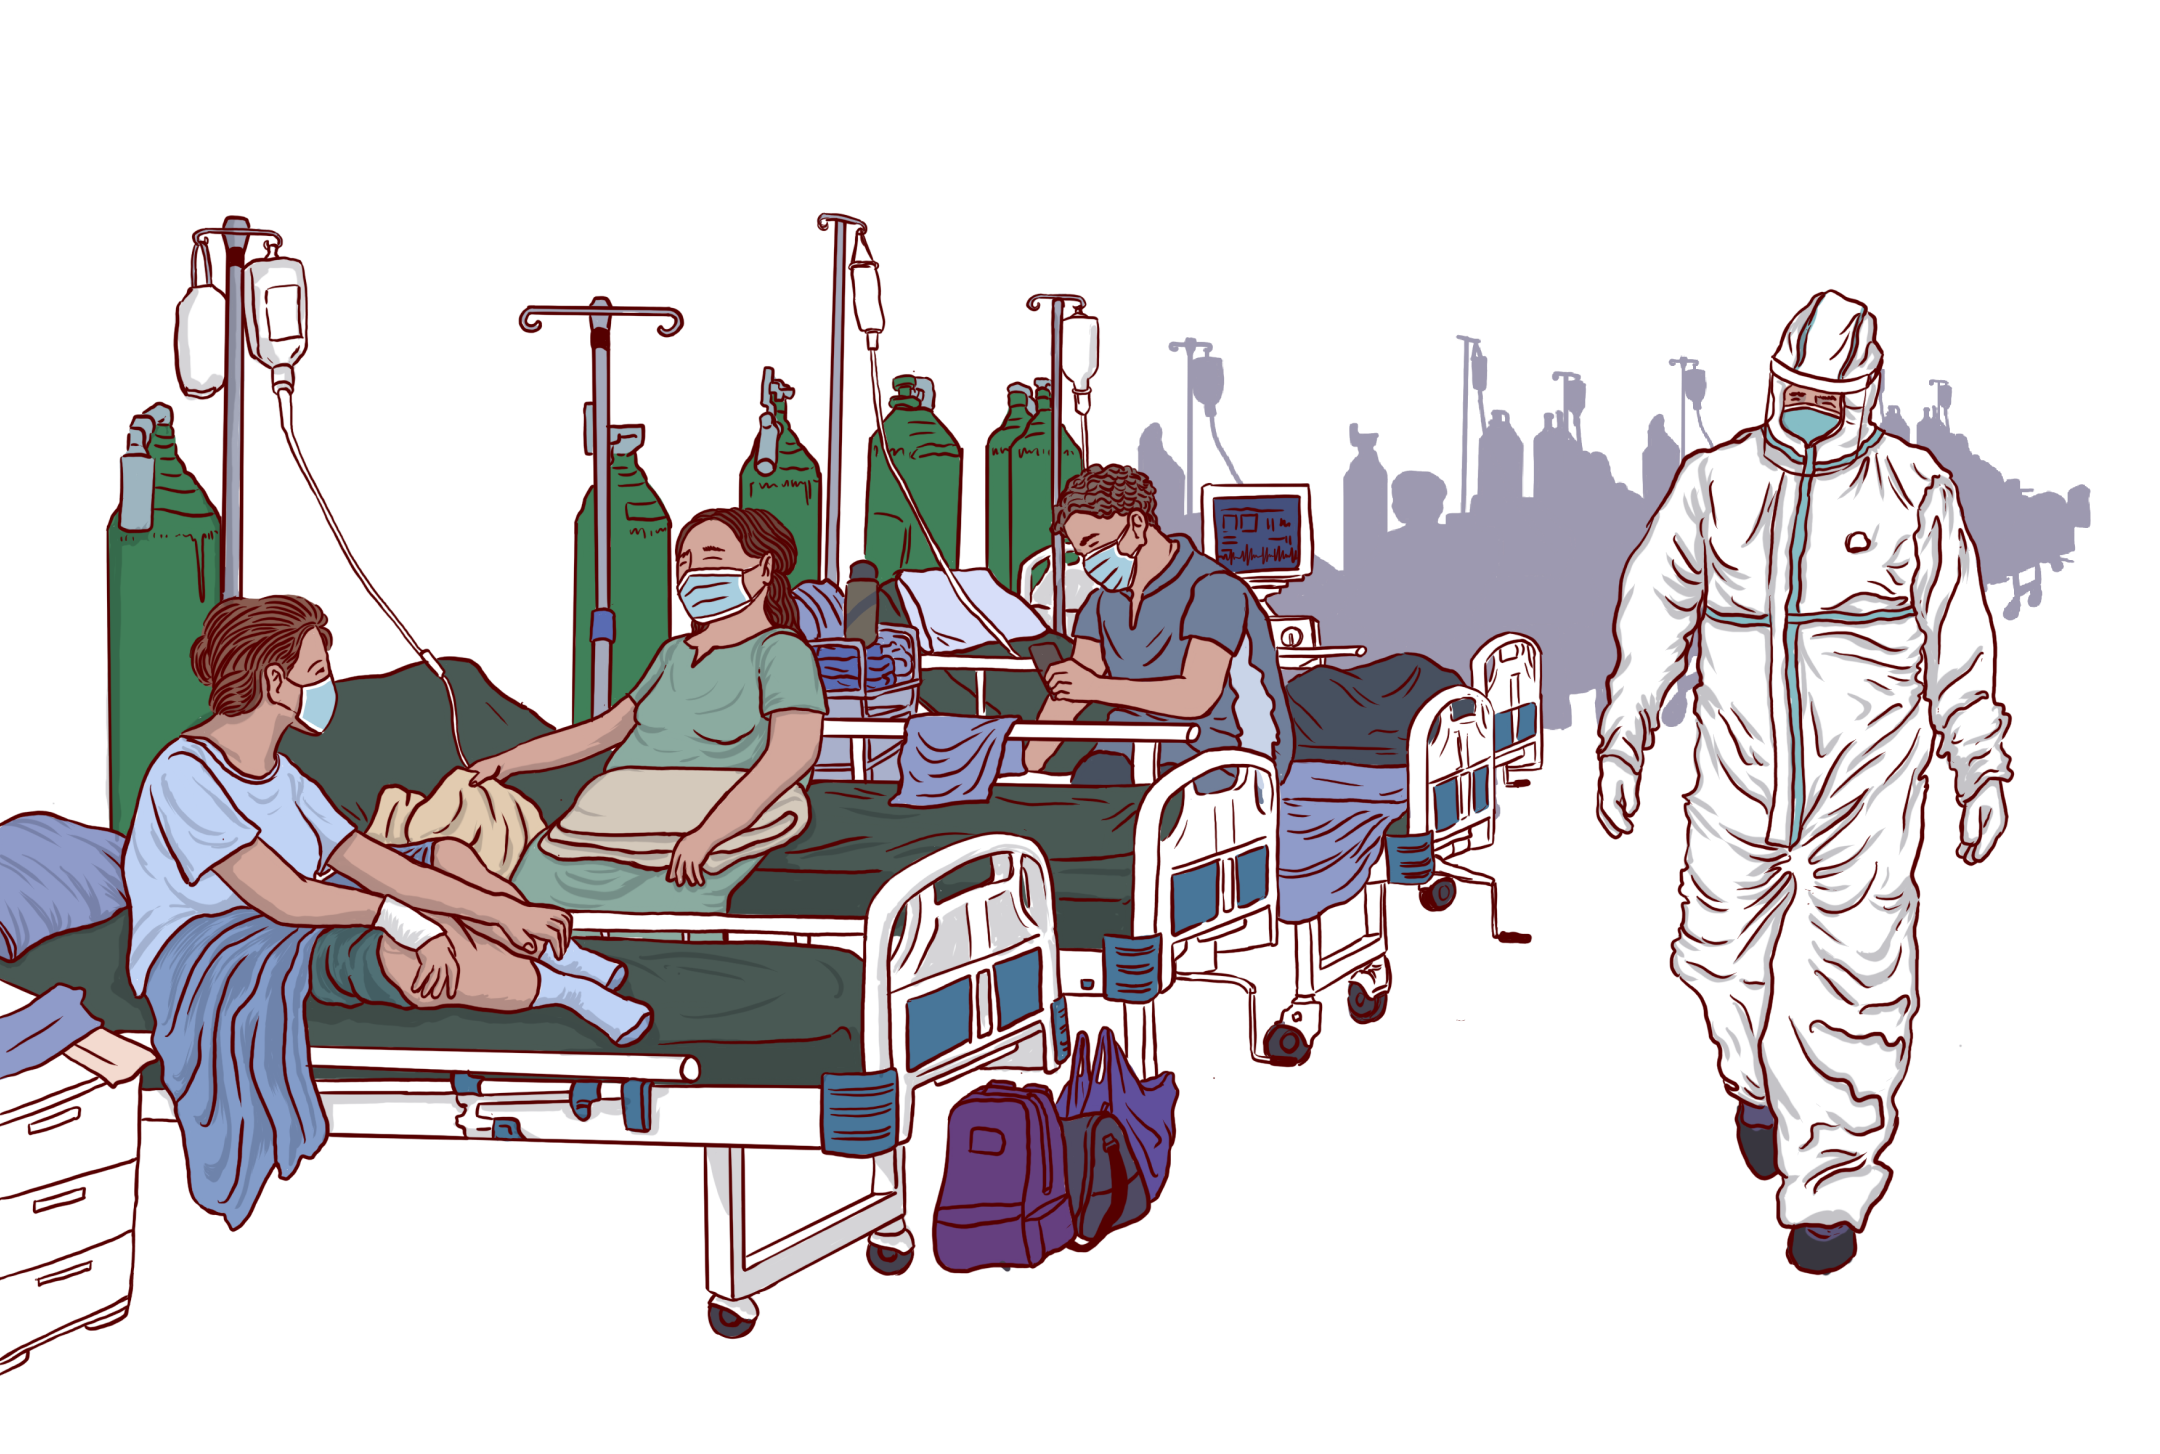 A cartoon illustration of a doctor in personal protective equipment walking along a row of sick people in hospital beds.